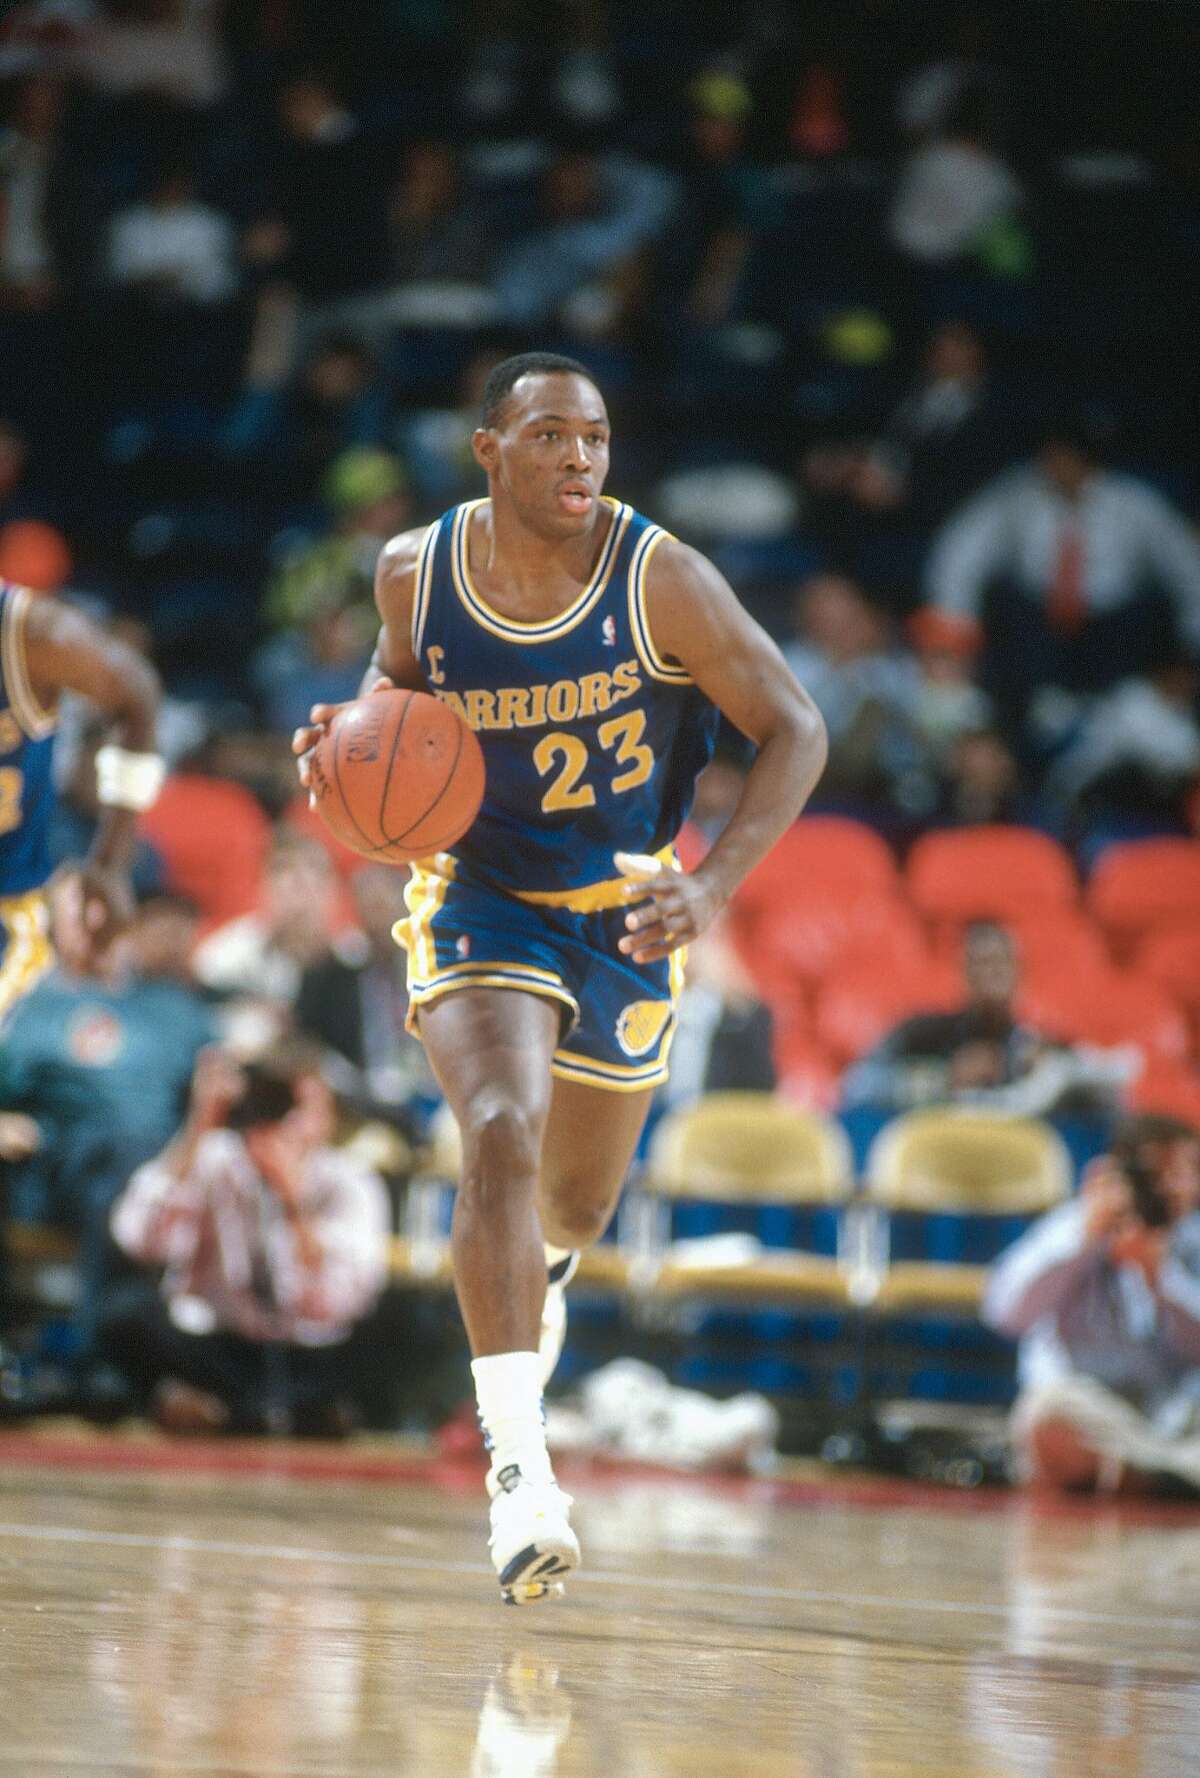 LANDOVER, MD - CIRCA 1990: Mitch Richmond #23 of the Golden State Warriors dribbles the ball up court against the Washington Bullets during an NBA basketball game circa 1990 at the Capital Centre in Landover, Maryland. Richmond played for the Warriors from 1988-91.